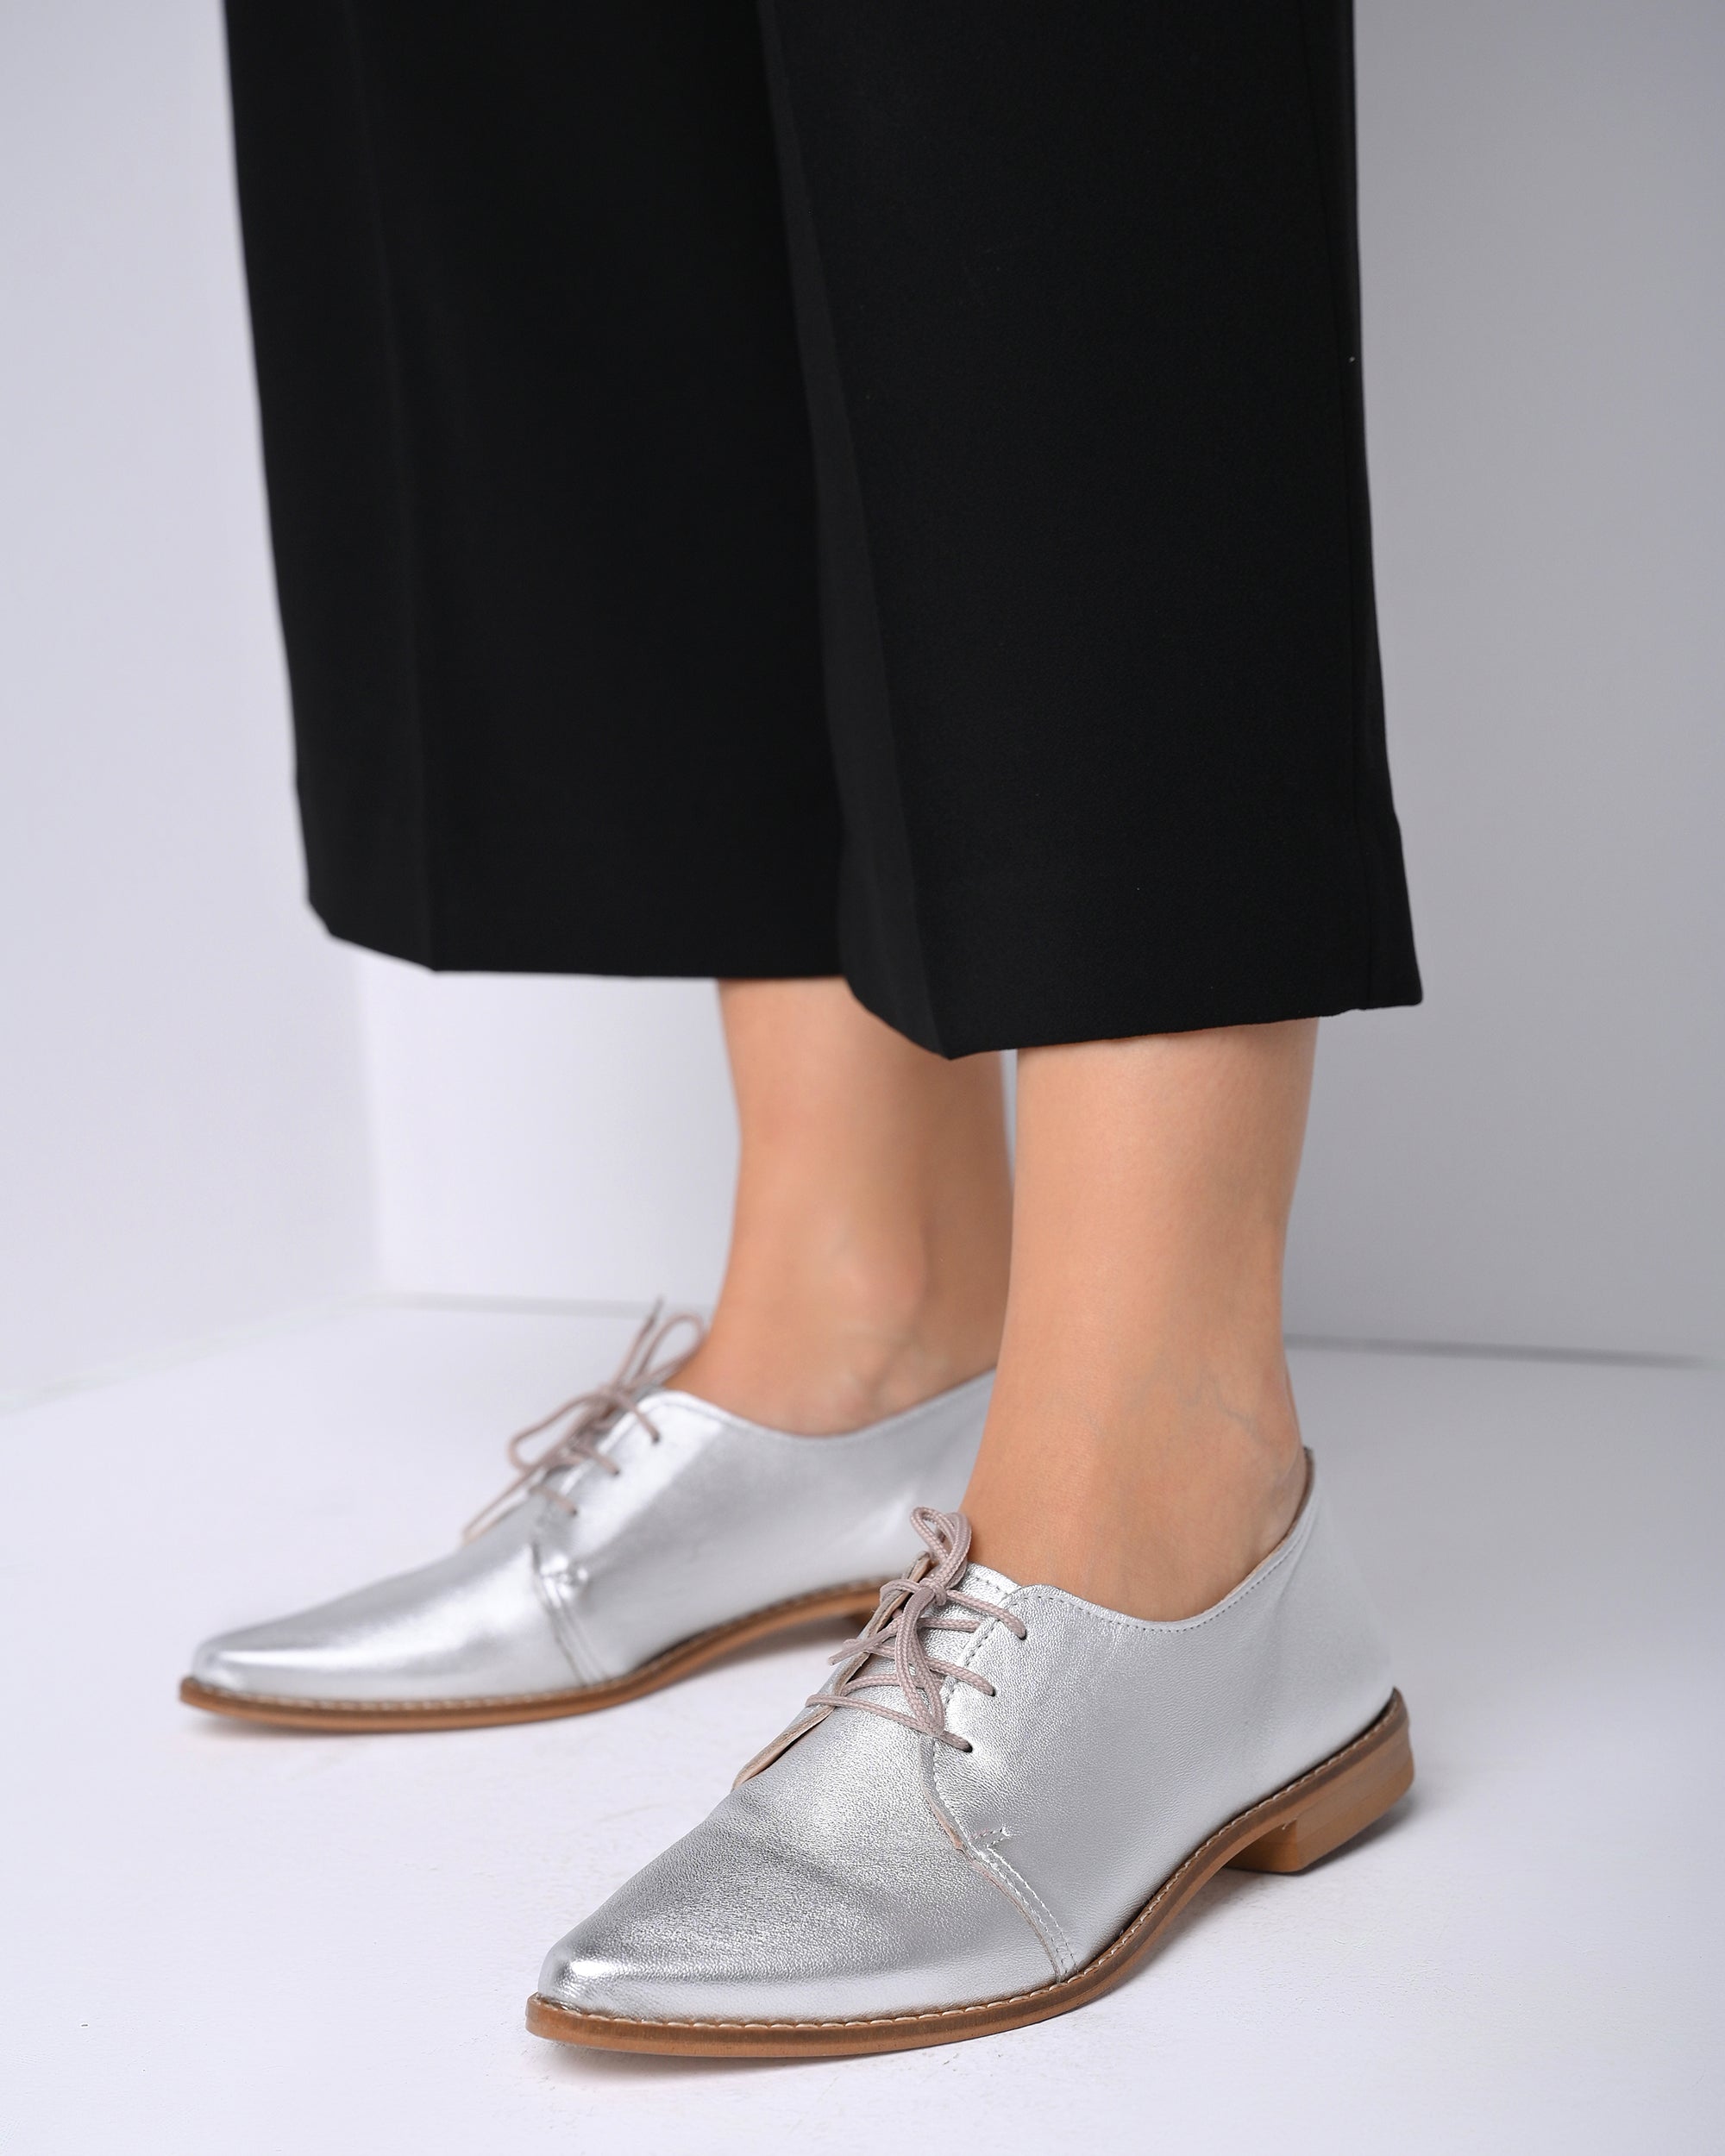 silver oxfords shoes